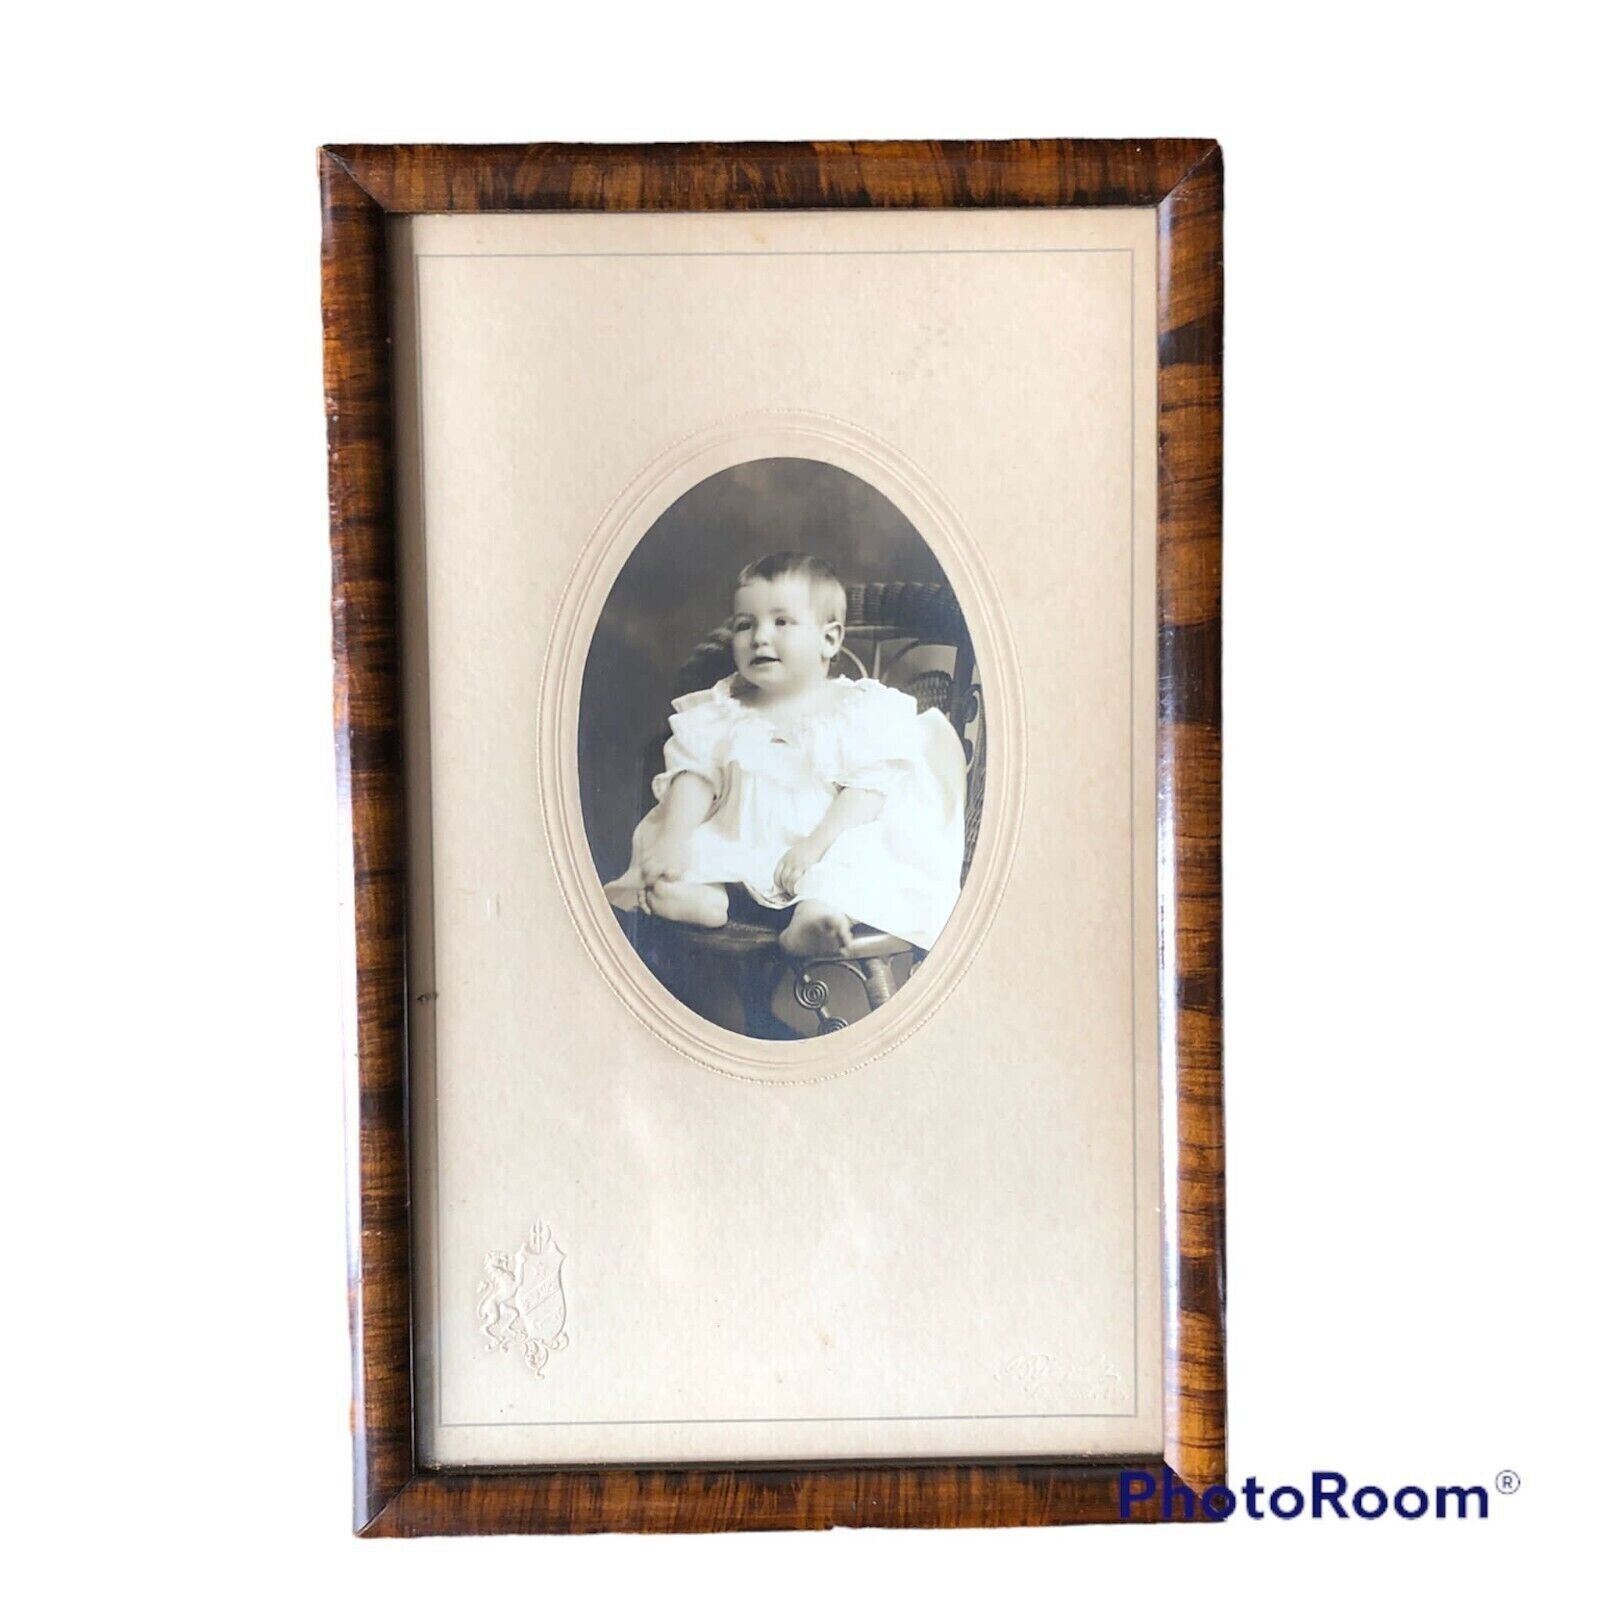 Antique Picture/Photo of a Baby 1890-1900s